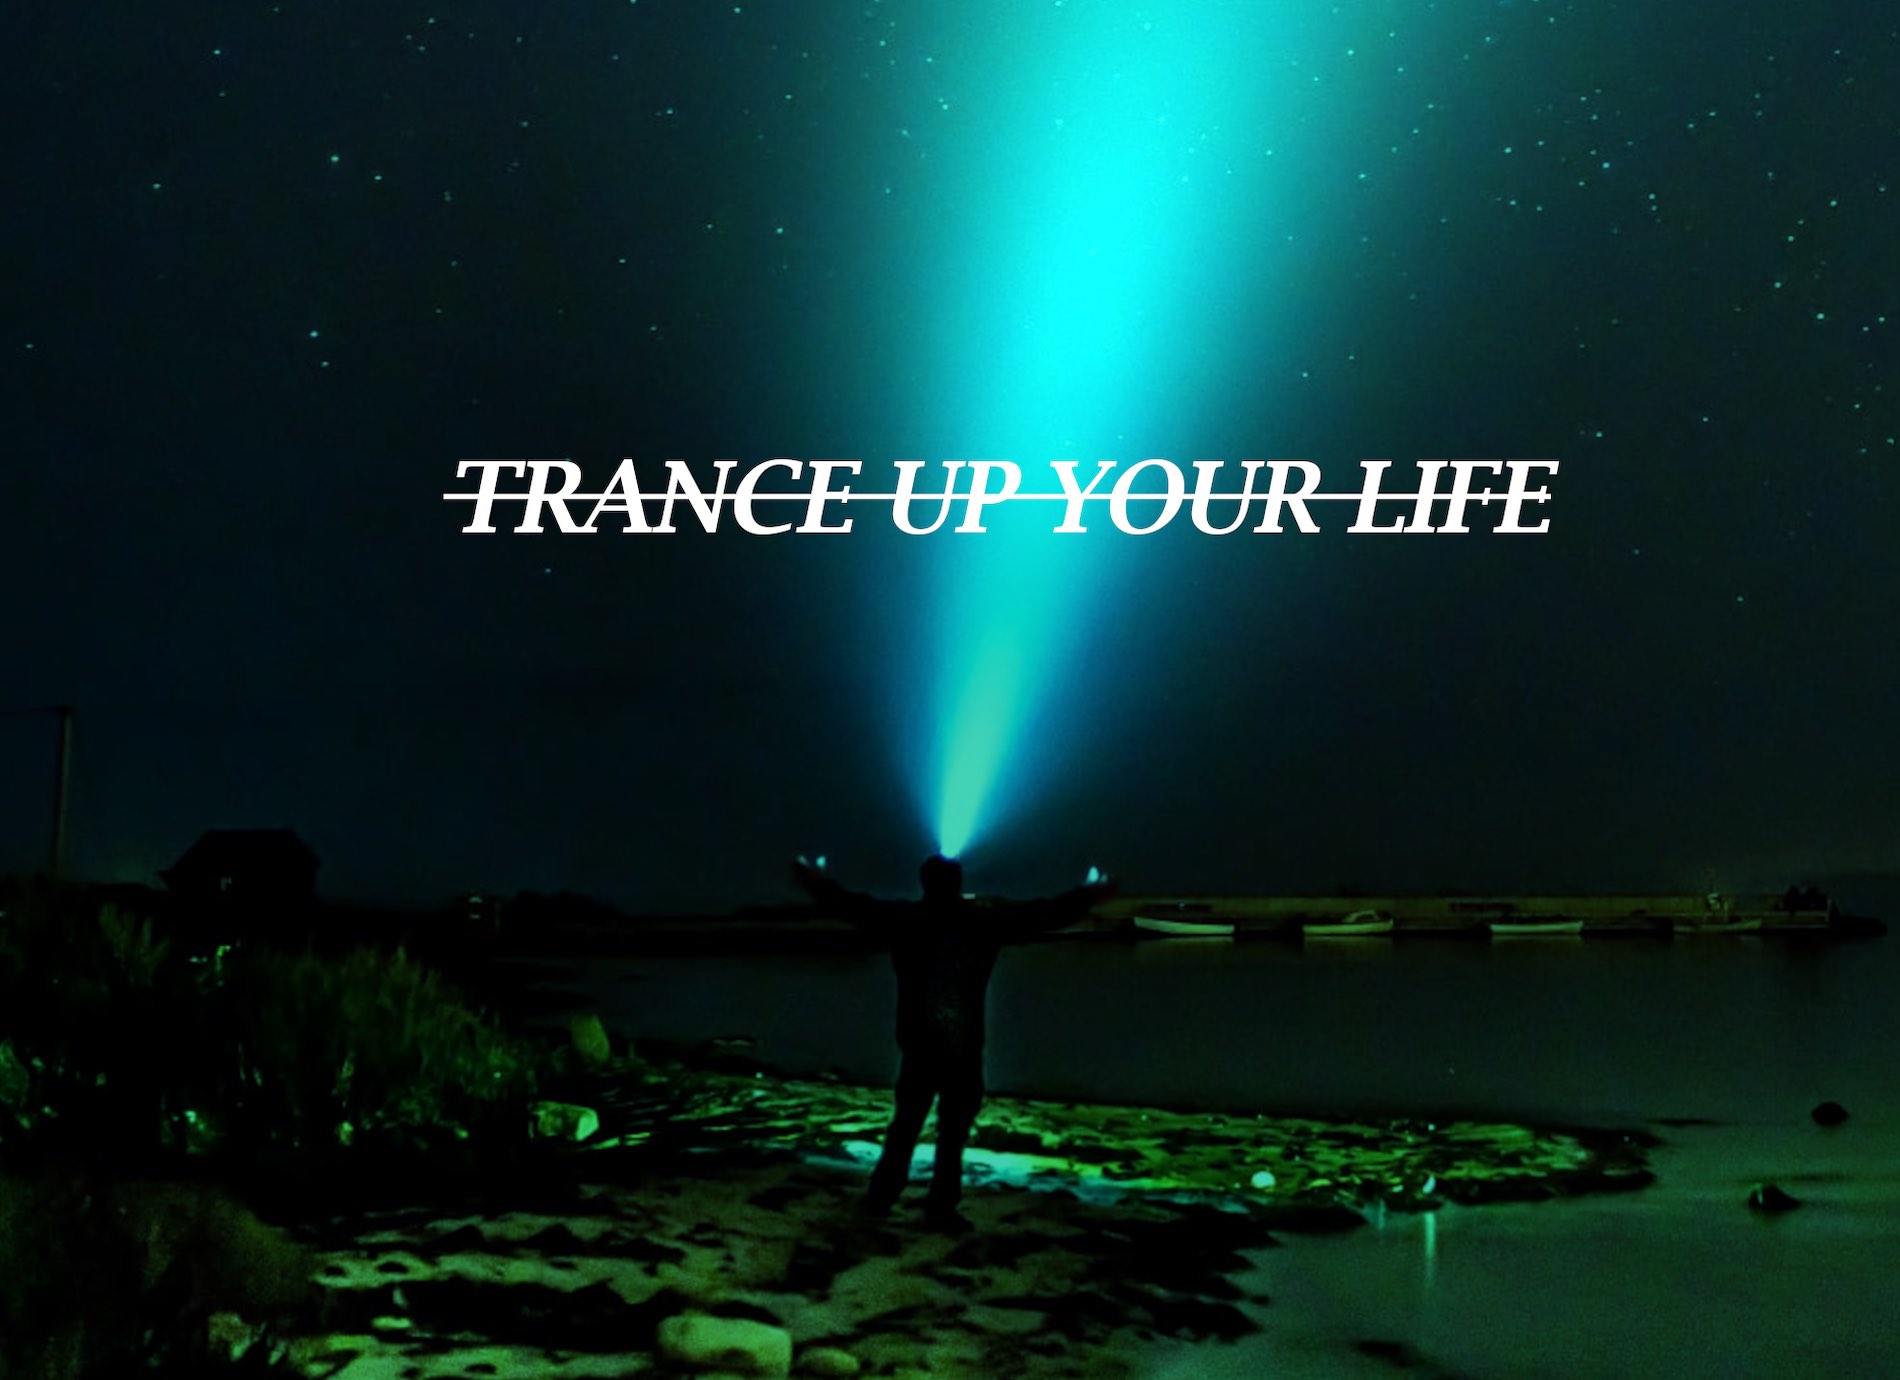 Trance Up Your Life with Peteerson